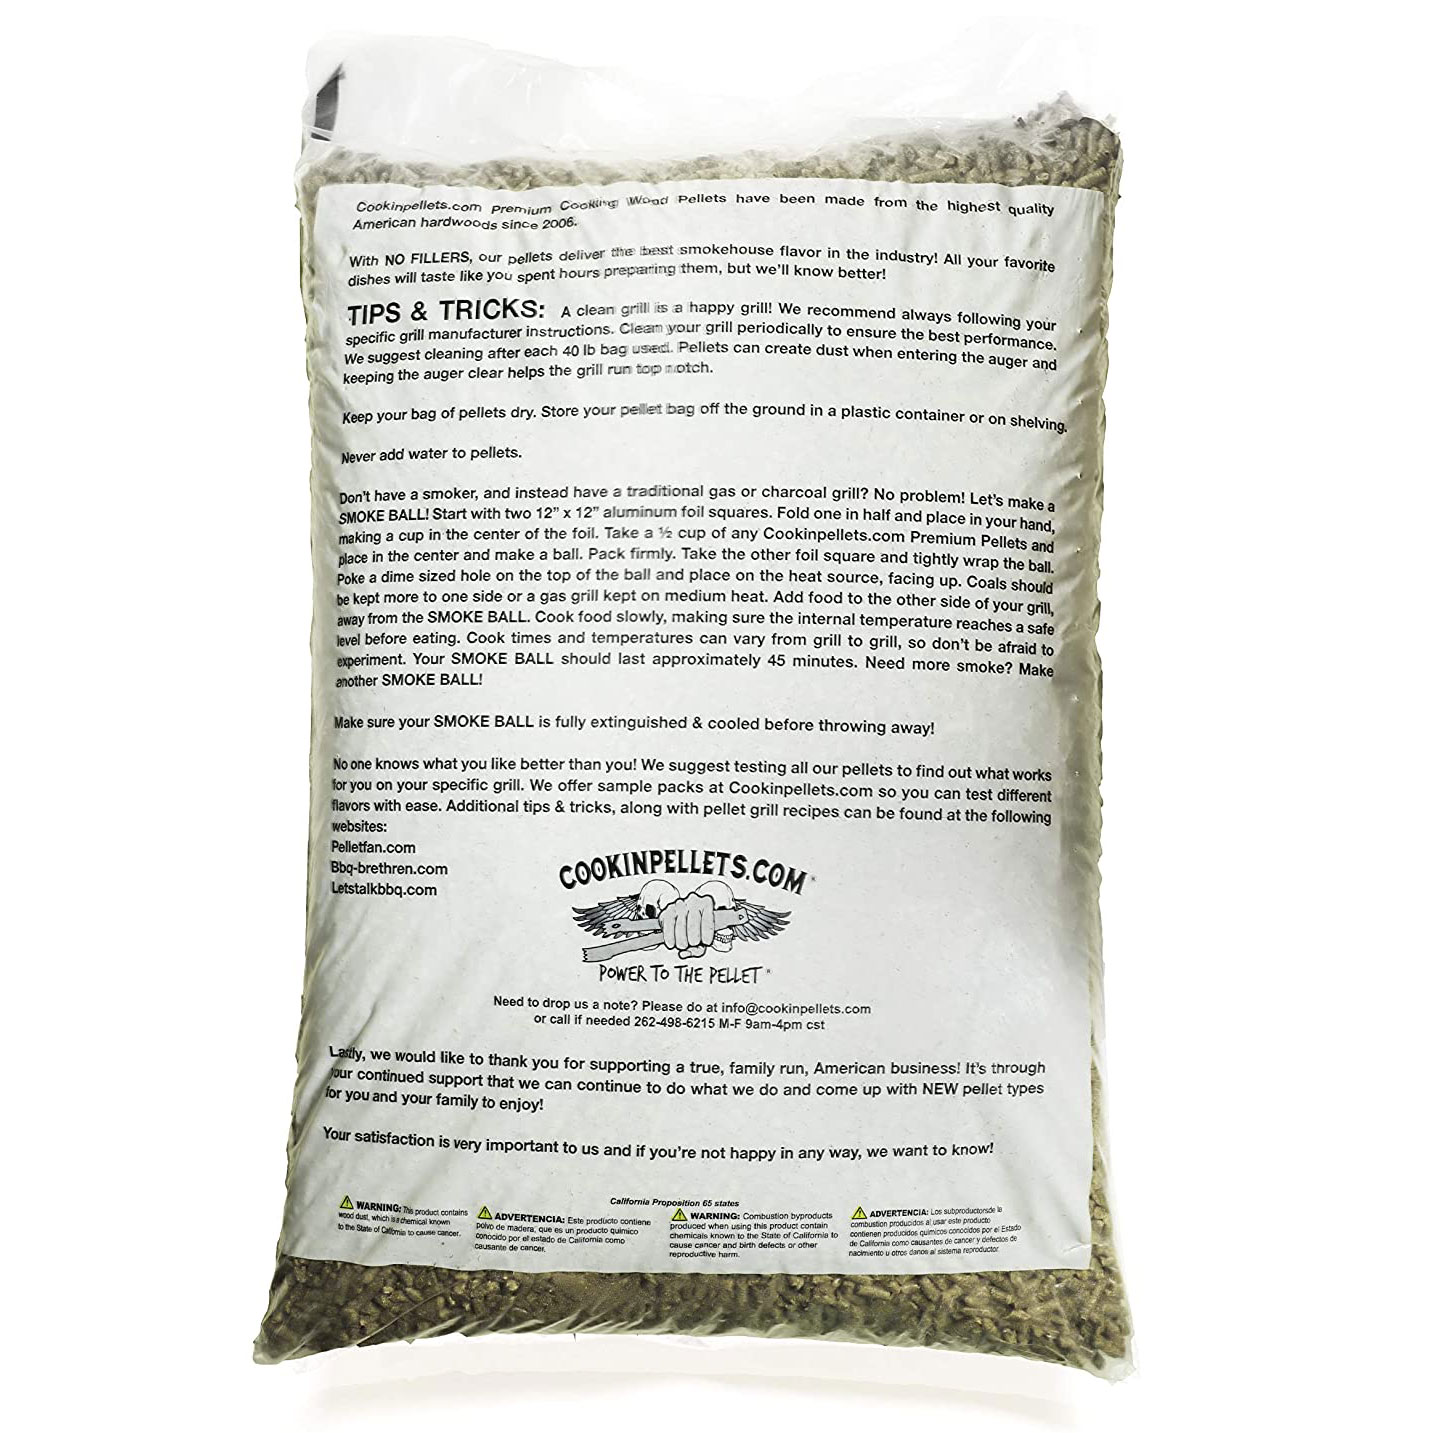 CookinPellets Premium Hickory Grill Smoker Smoking Wood Pellets, 40 Pound Bag - image 2 of 2